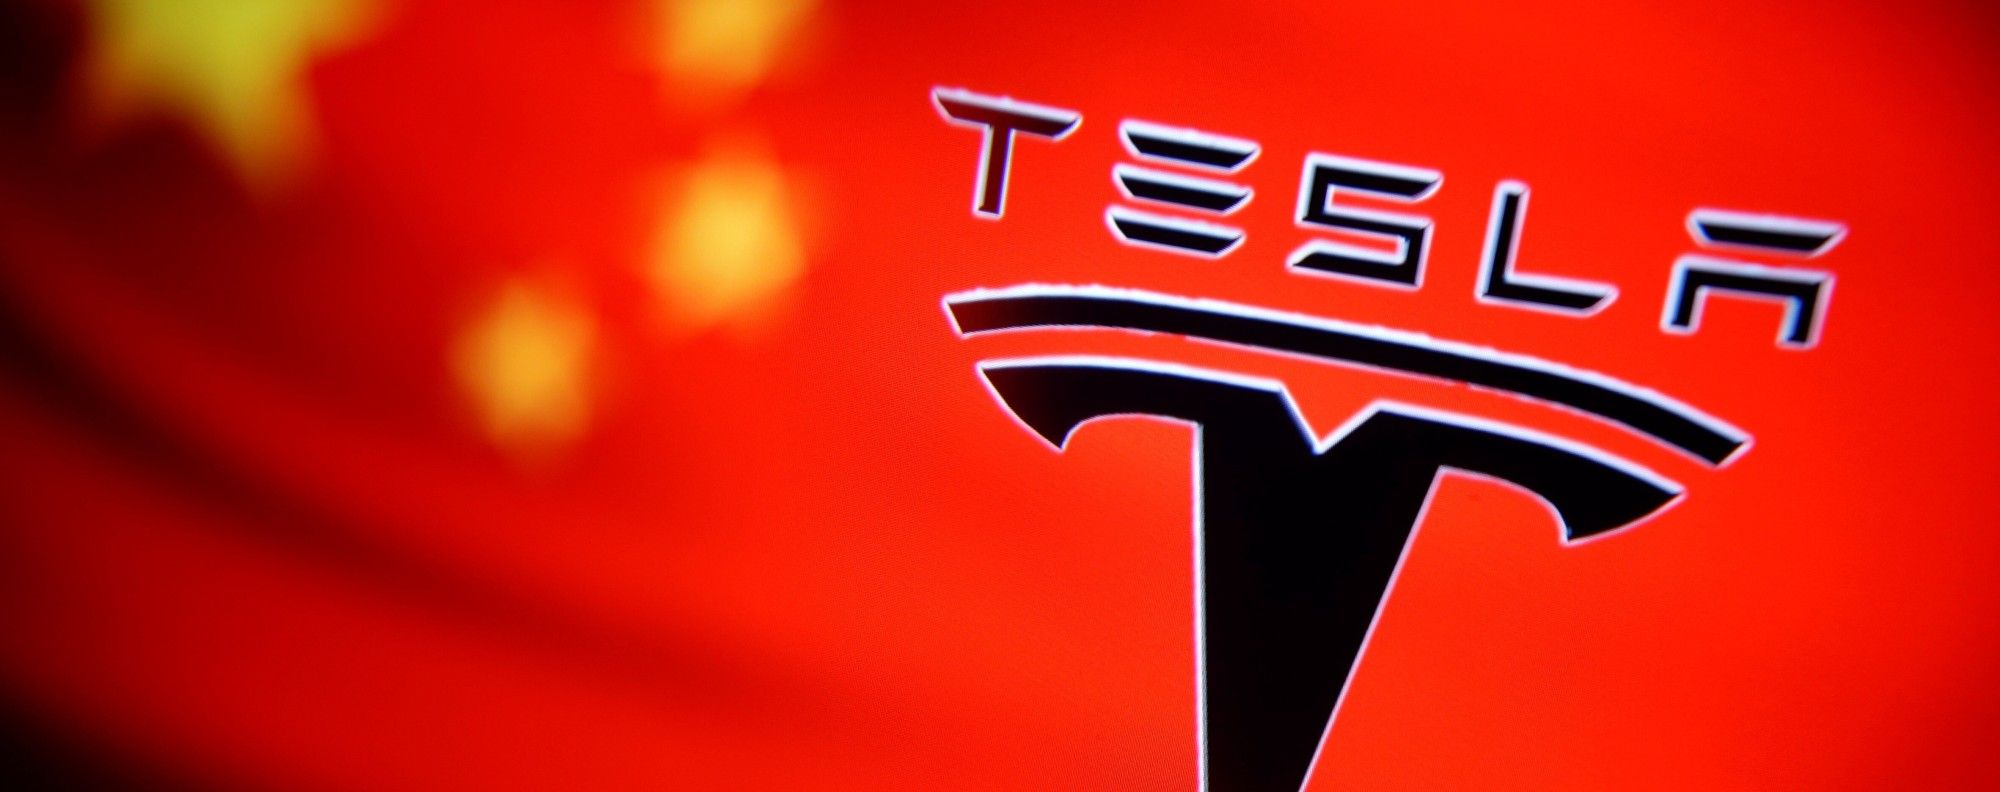 Tesla's 50% price cut causes 'havoc' in China's electric car market: report